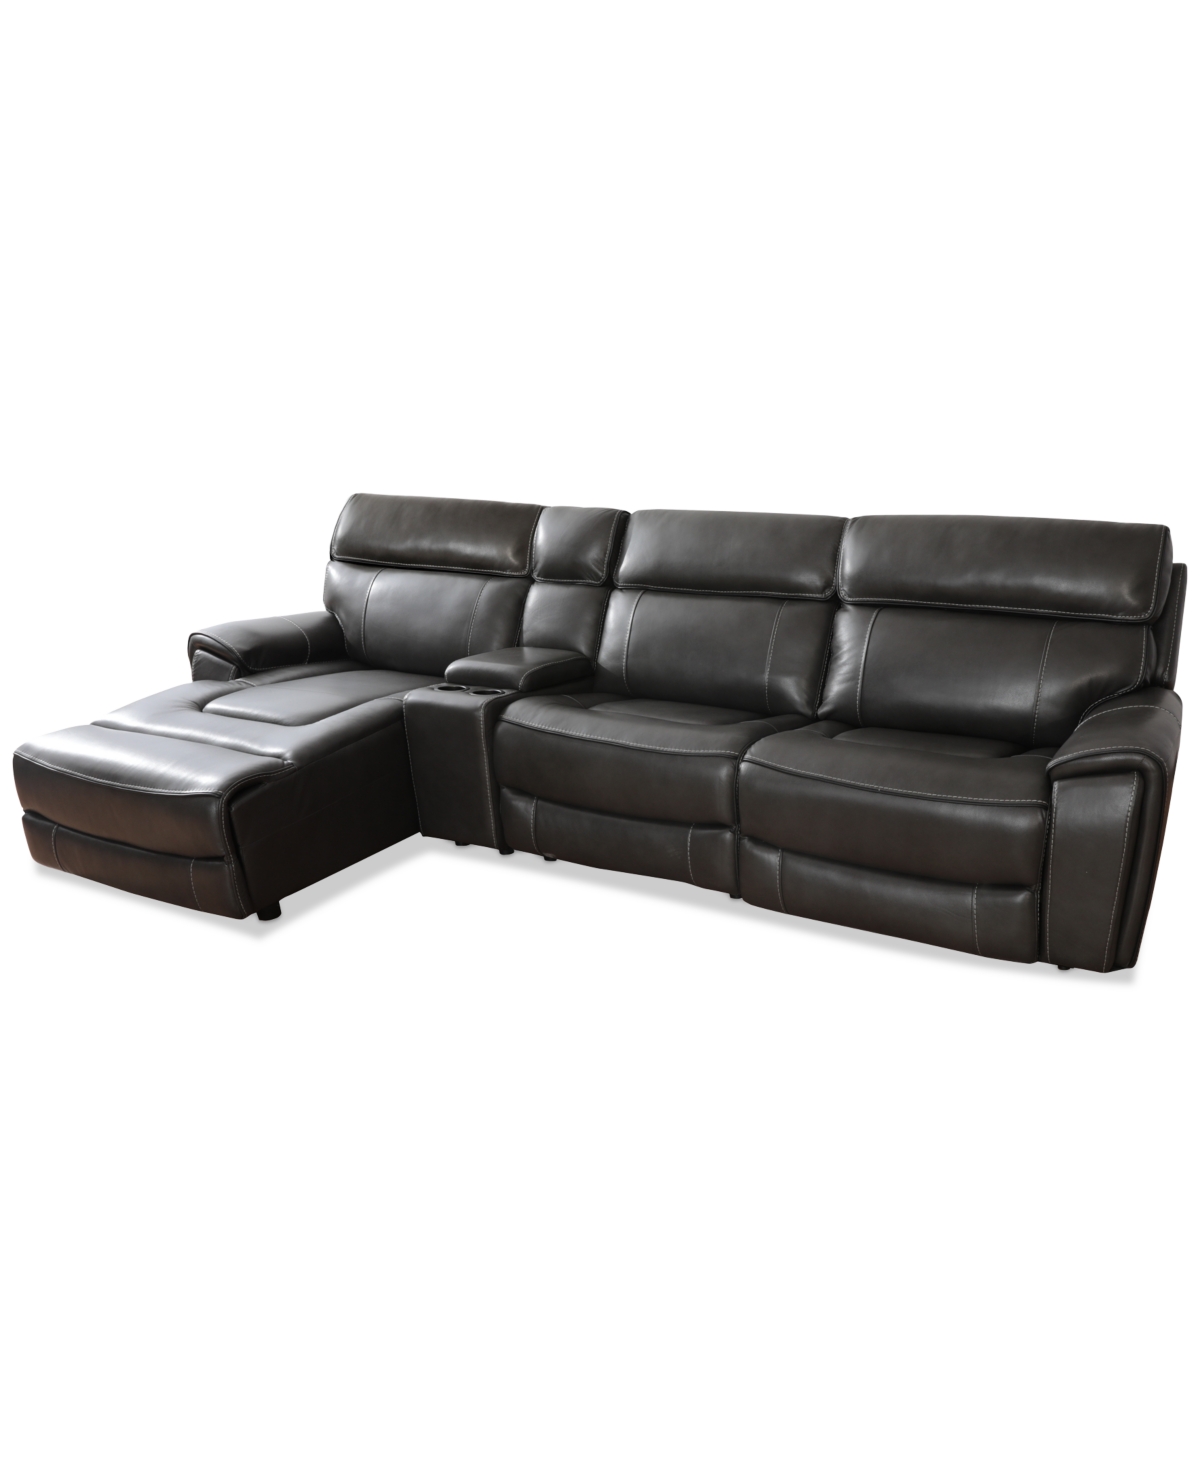 Macy's Hutchenson 127.5" 4-pc. Zero Gravity Leather Sectional With 1 Power Recliner, Chaise And Console, Cr In Grey